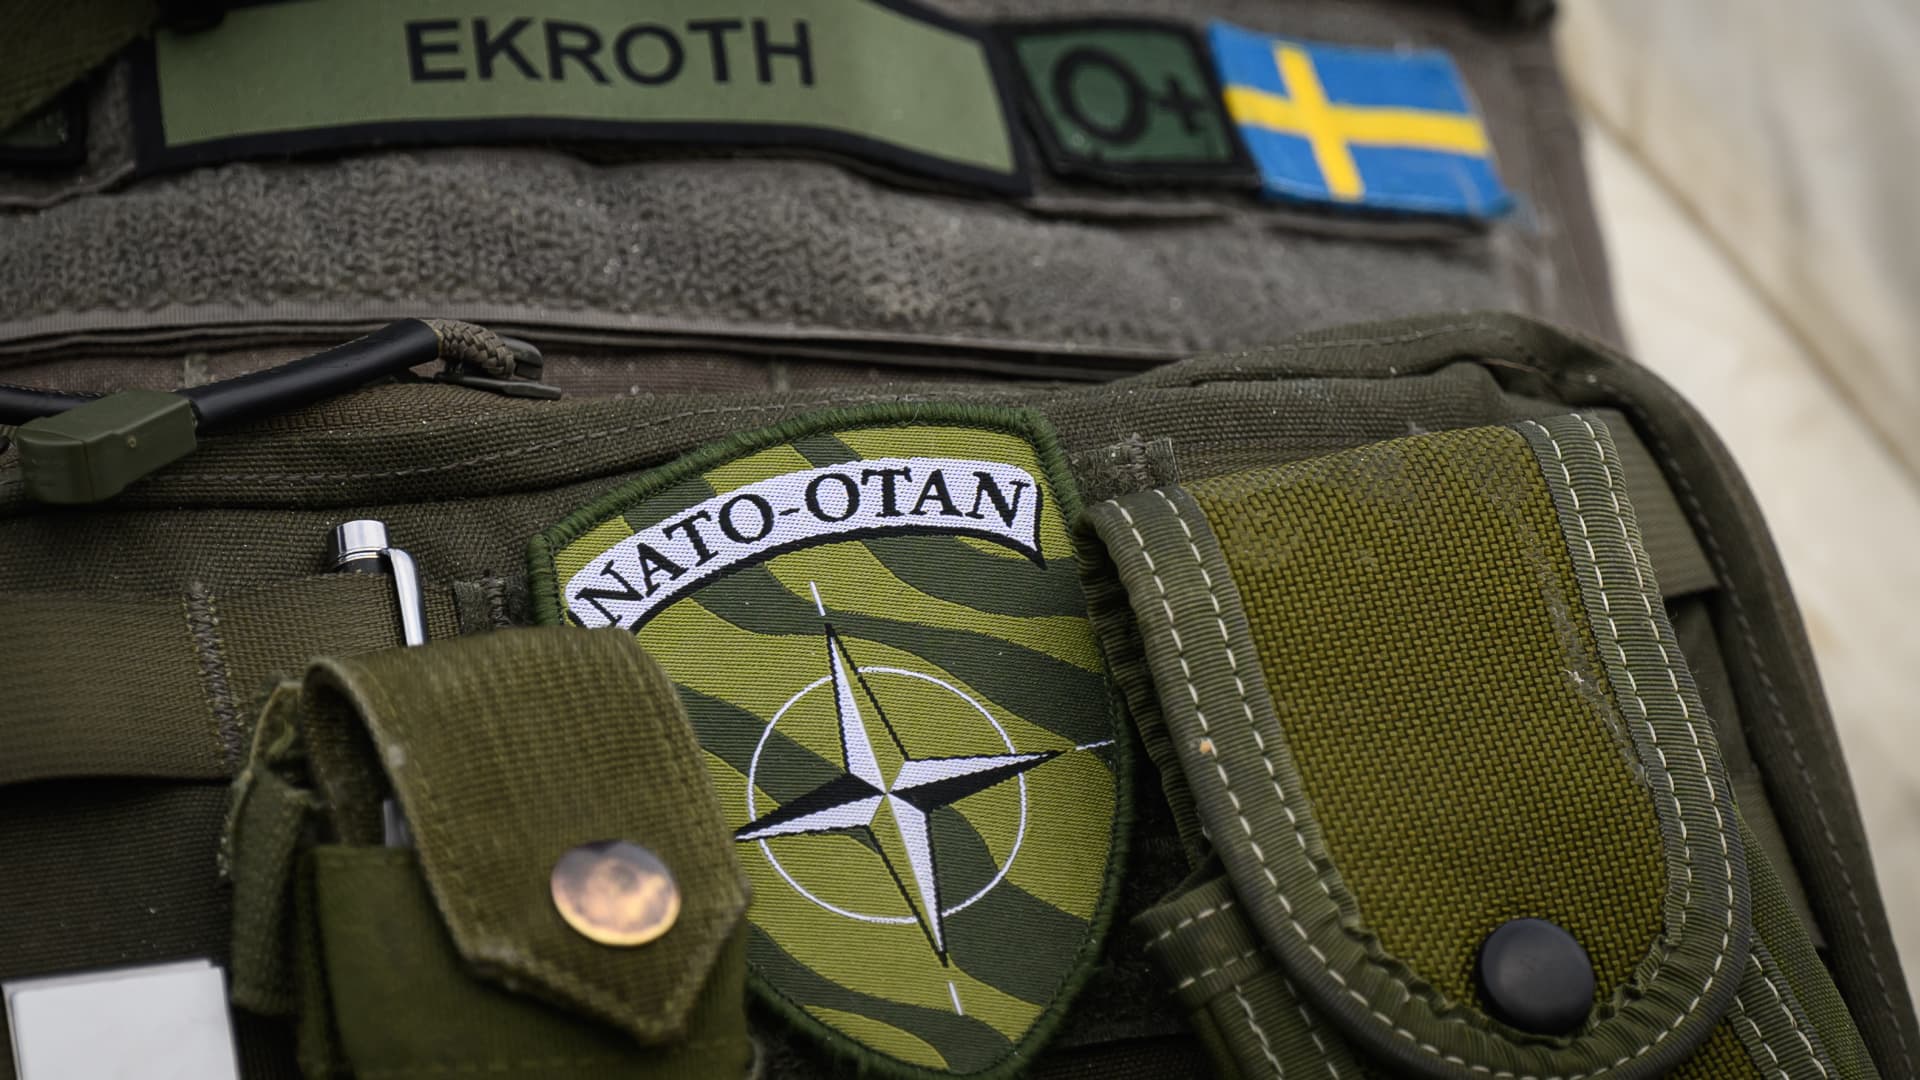 Logistics Battalion Commander Major Anders Ekroth gestures to his NATO badge as he is interviewed at a supply depot during the Nordic Response military exercise on March 08, 2024 in Unspecified - Region EMEA. 